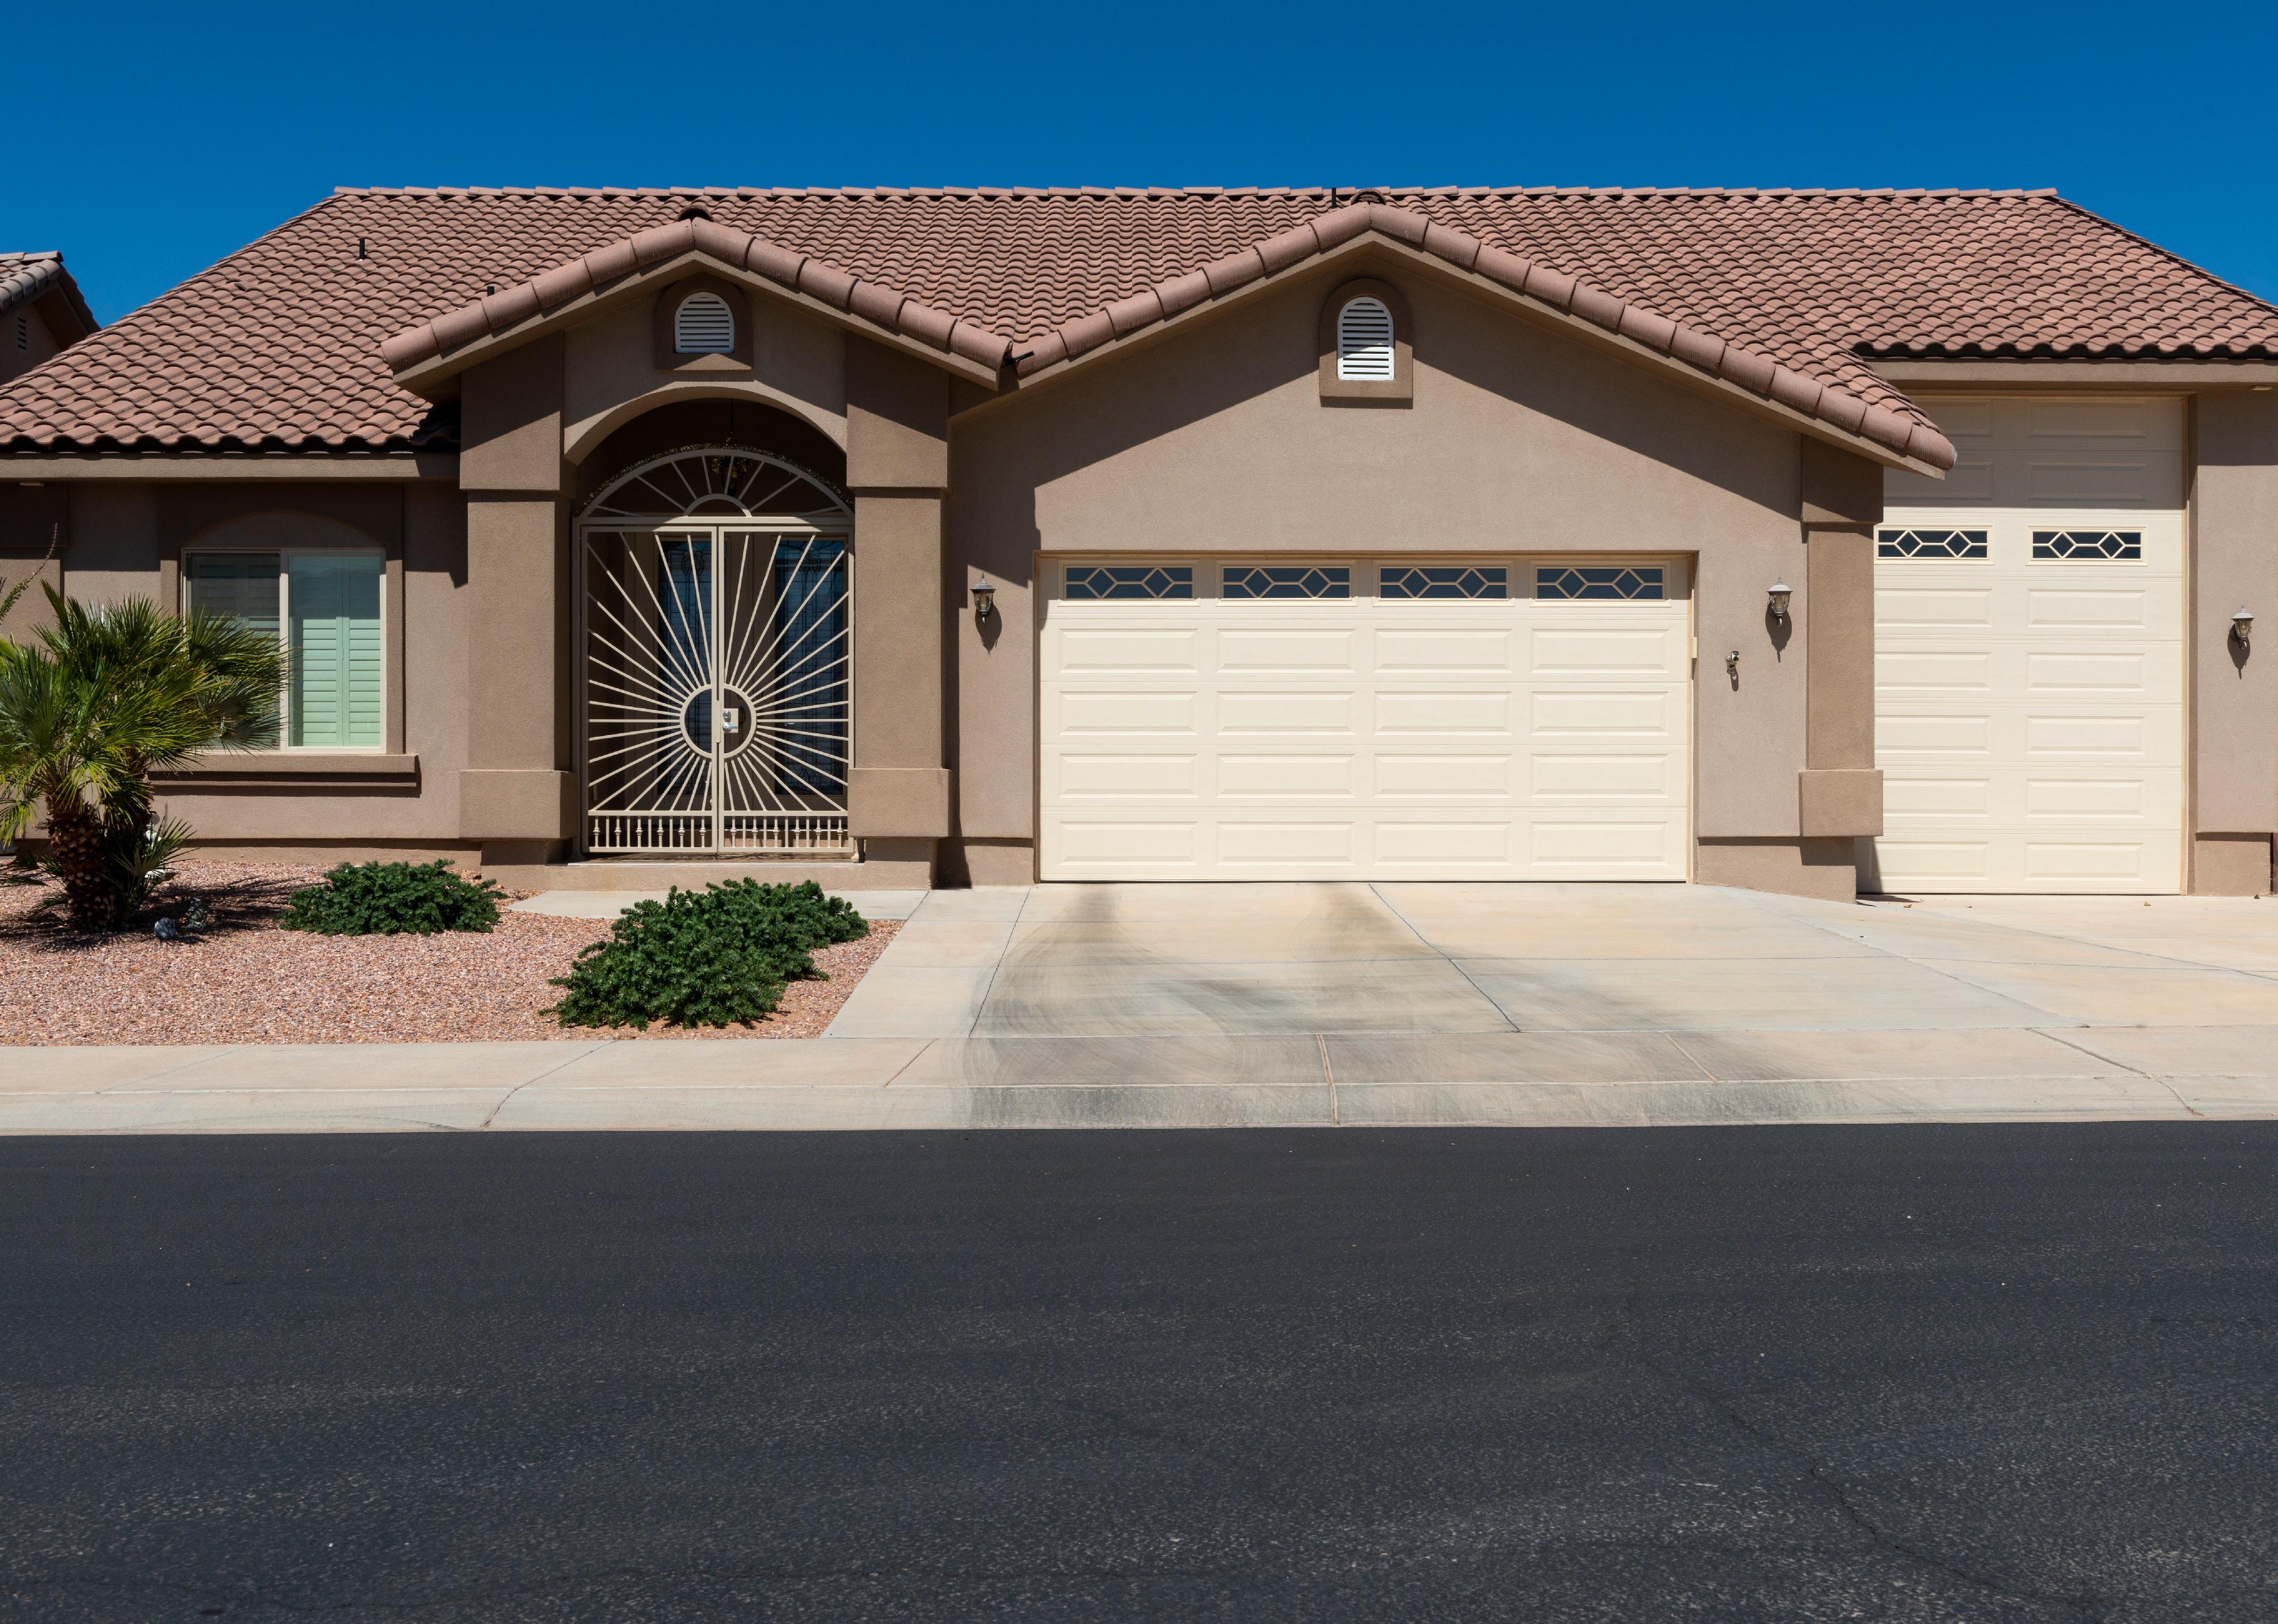 The facade of a residential house in a suburb area in Nevada.